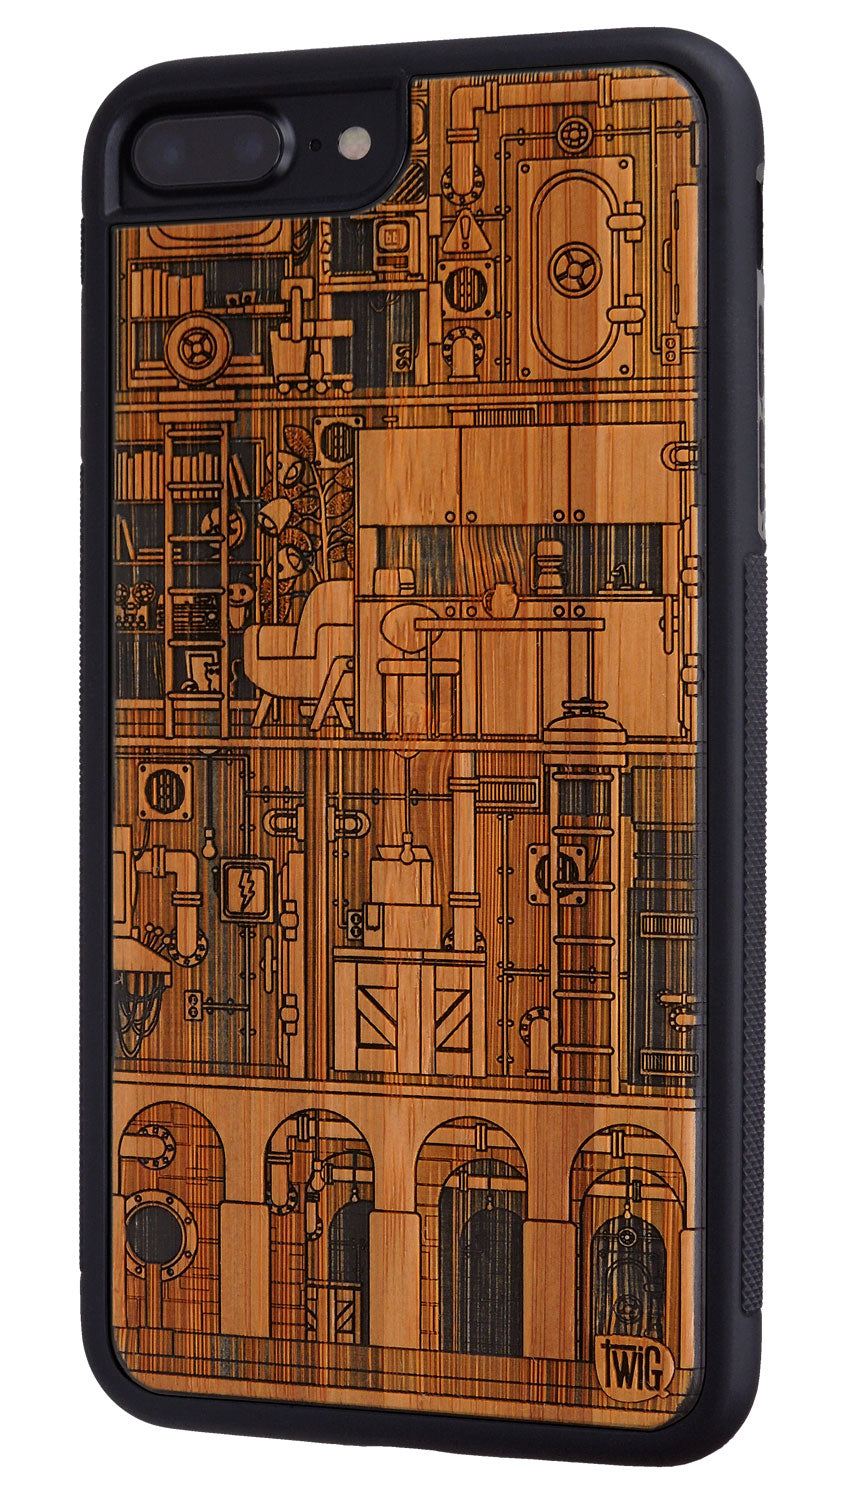 The Bunker - Bamboo iPhone Case, iPhone Case - Twig Case Co.